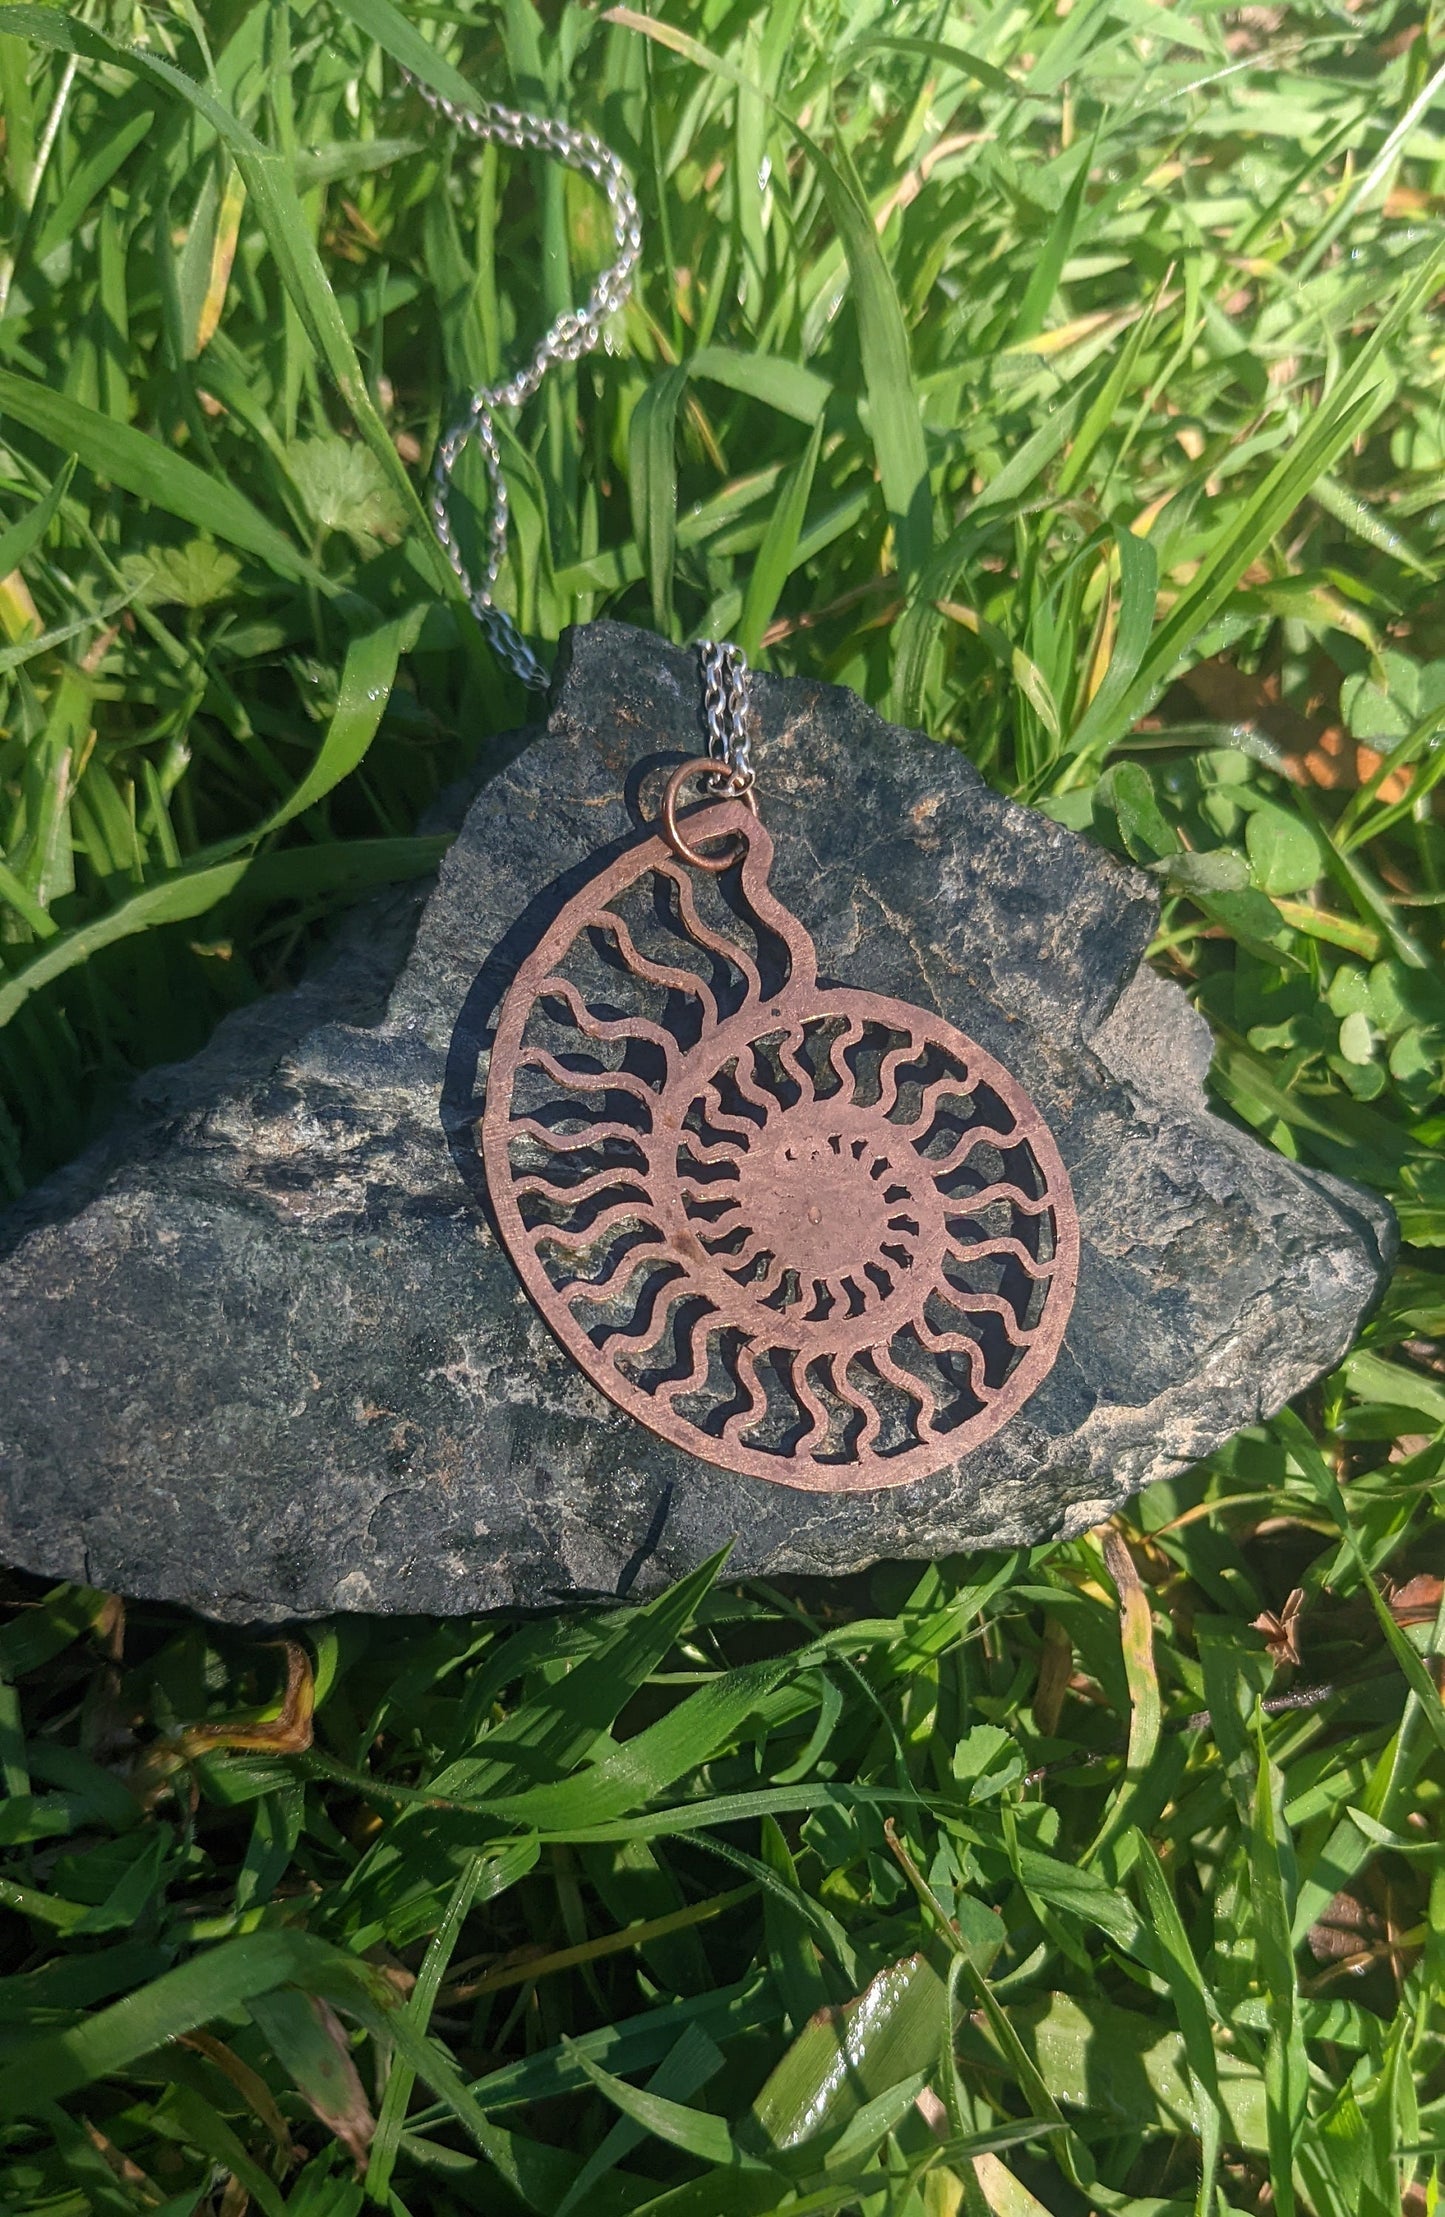 Ammonite Pendant in Bronze with Silver Chain - Nautilus Fossil Seashell Necklace Hand Hammered Jewelry